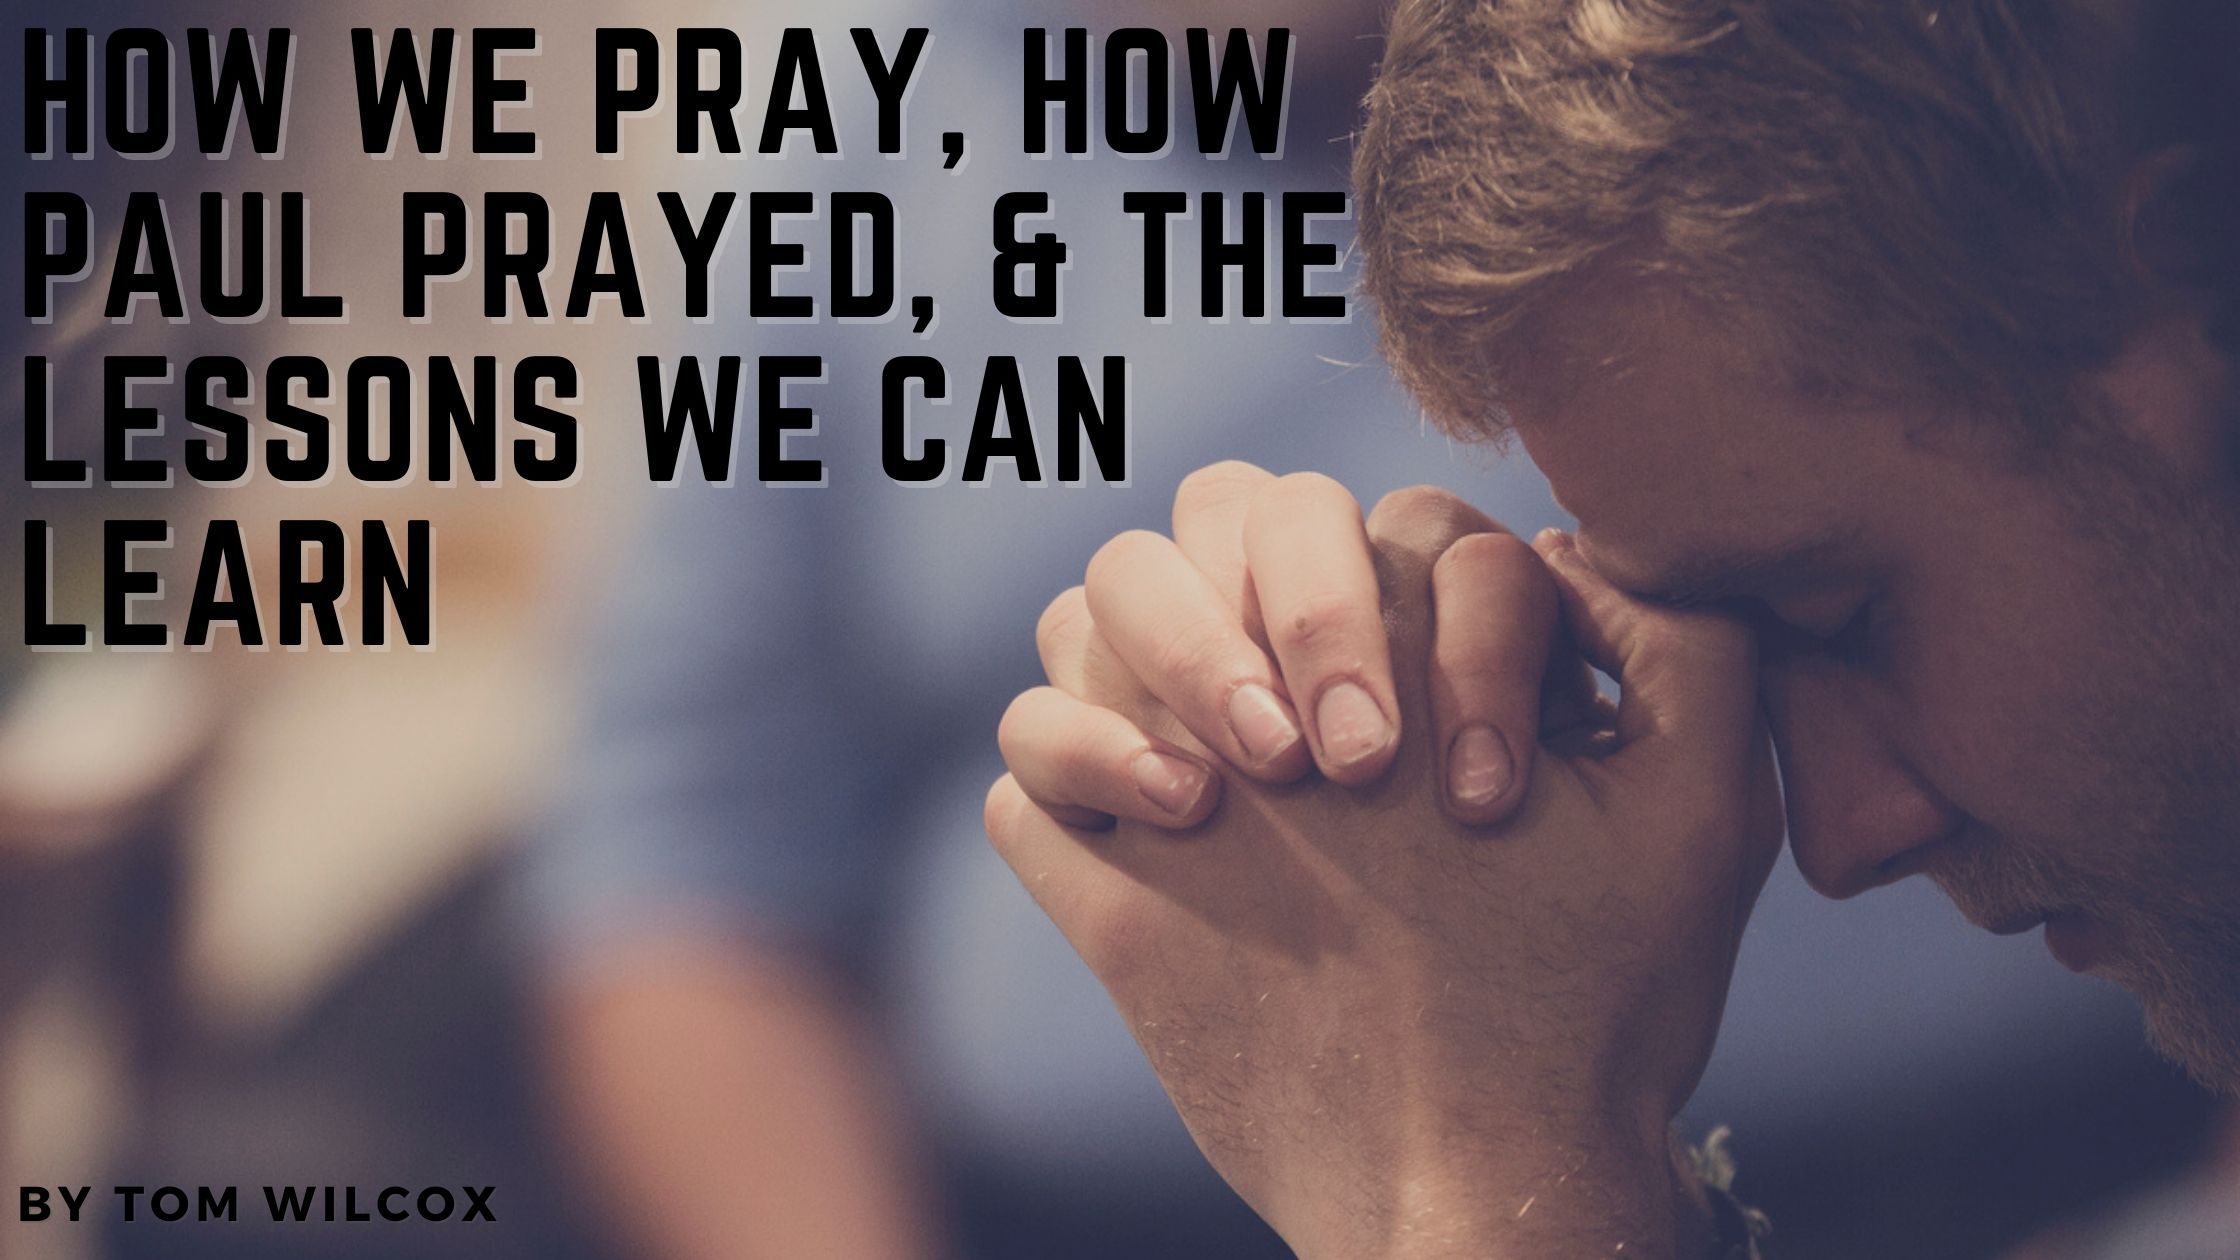 How We Pray, How Paul Prayed, & The Lessons We Can Learn